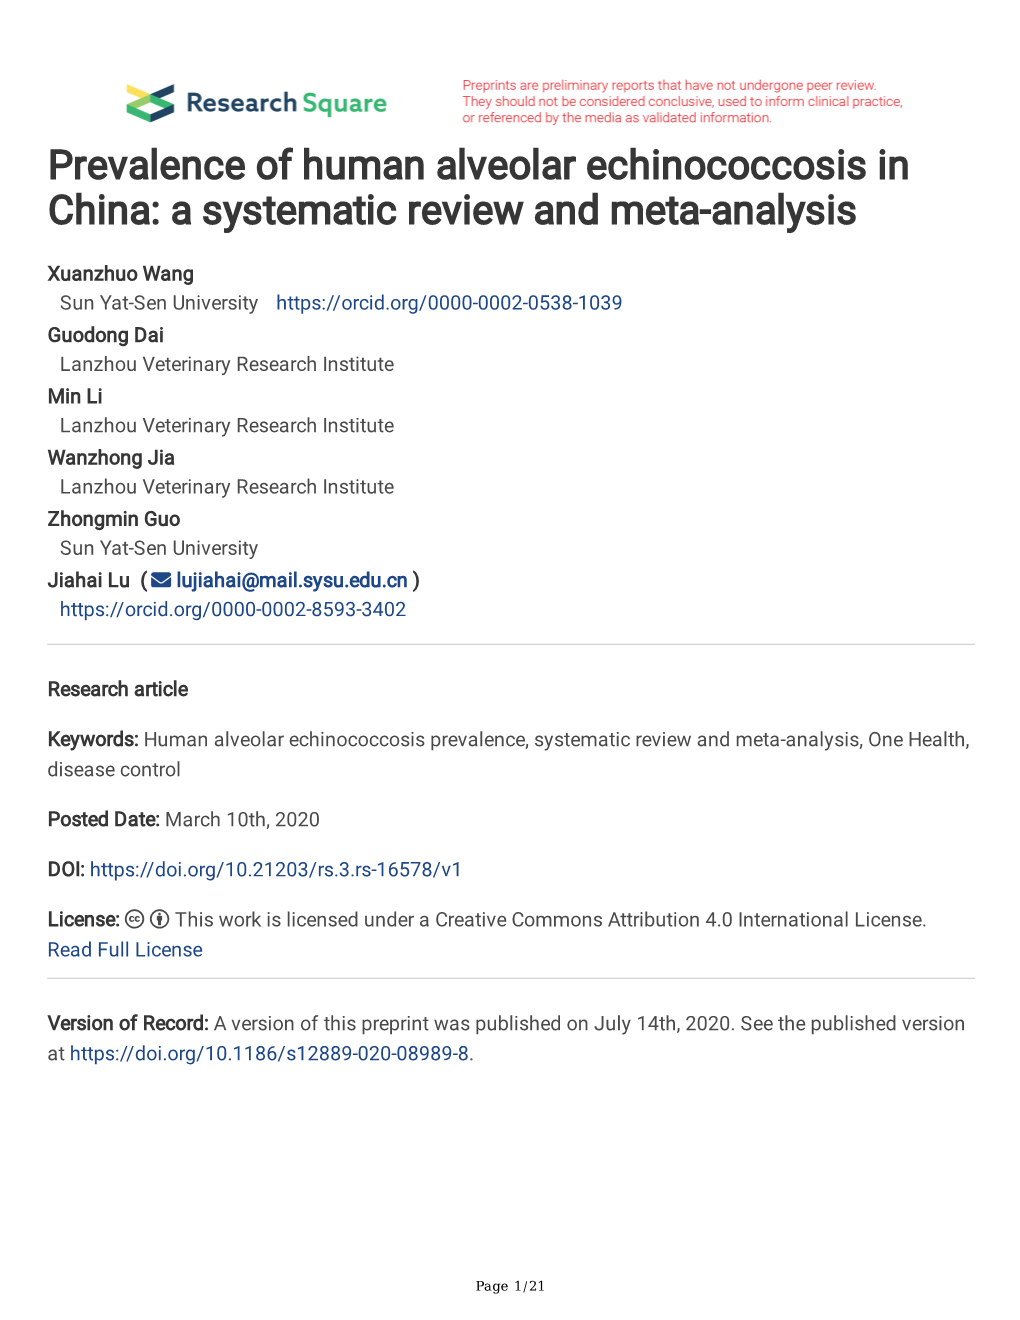 Prevalence of Human Alveolar Echinococcosis in China: a Systematic Review and Meta-Analysis